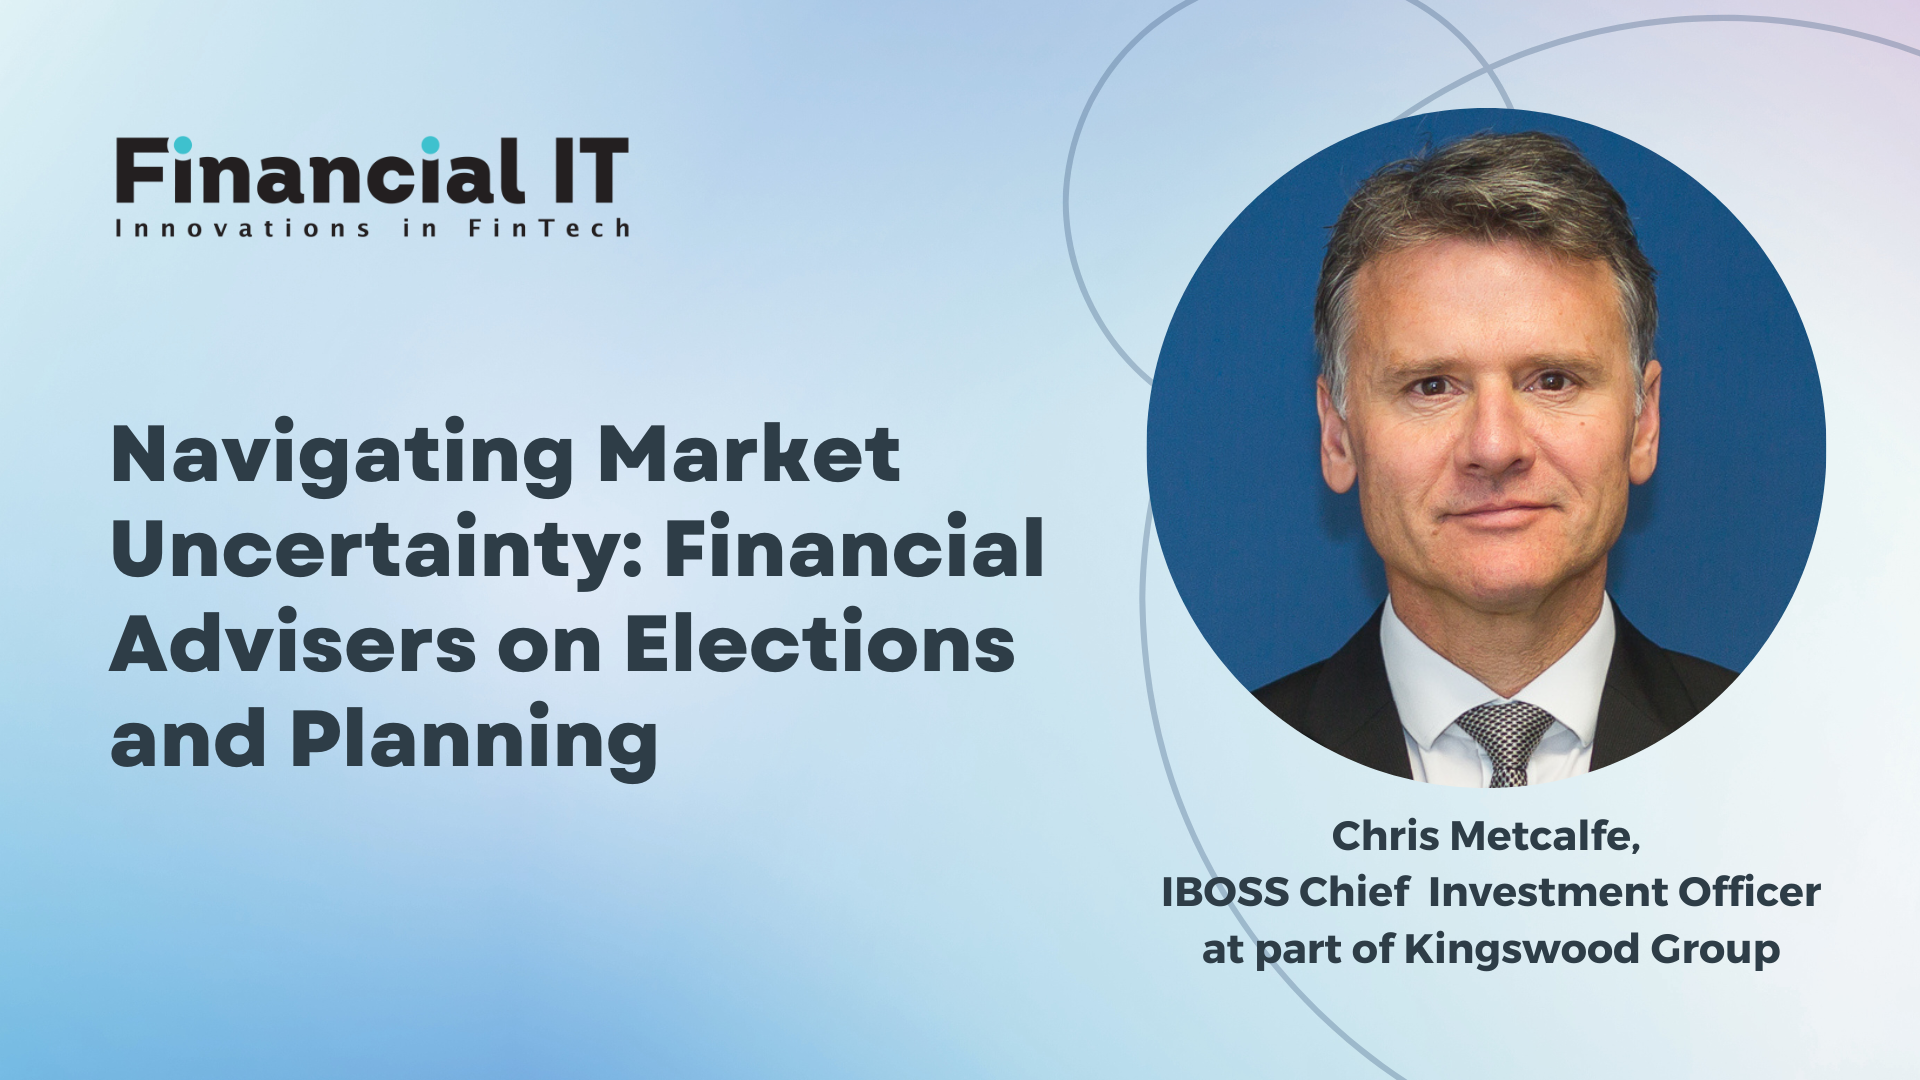 Navigating Market Uncertainty: Financial Advisers on Elections and Planning